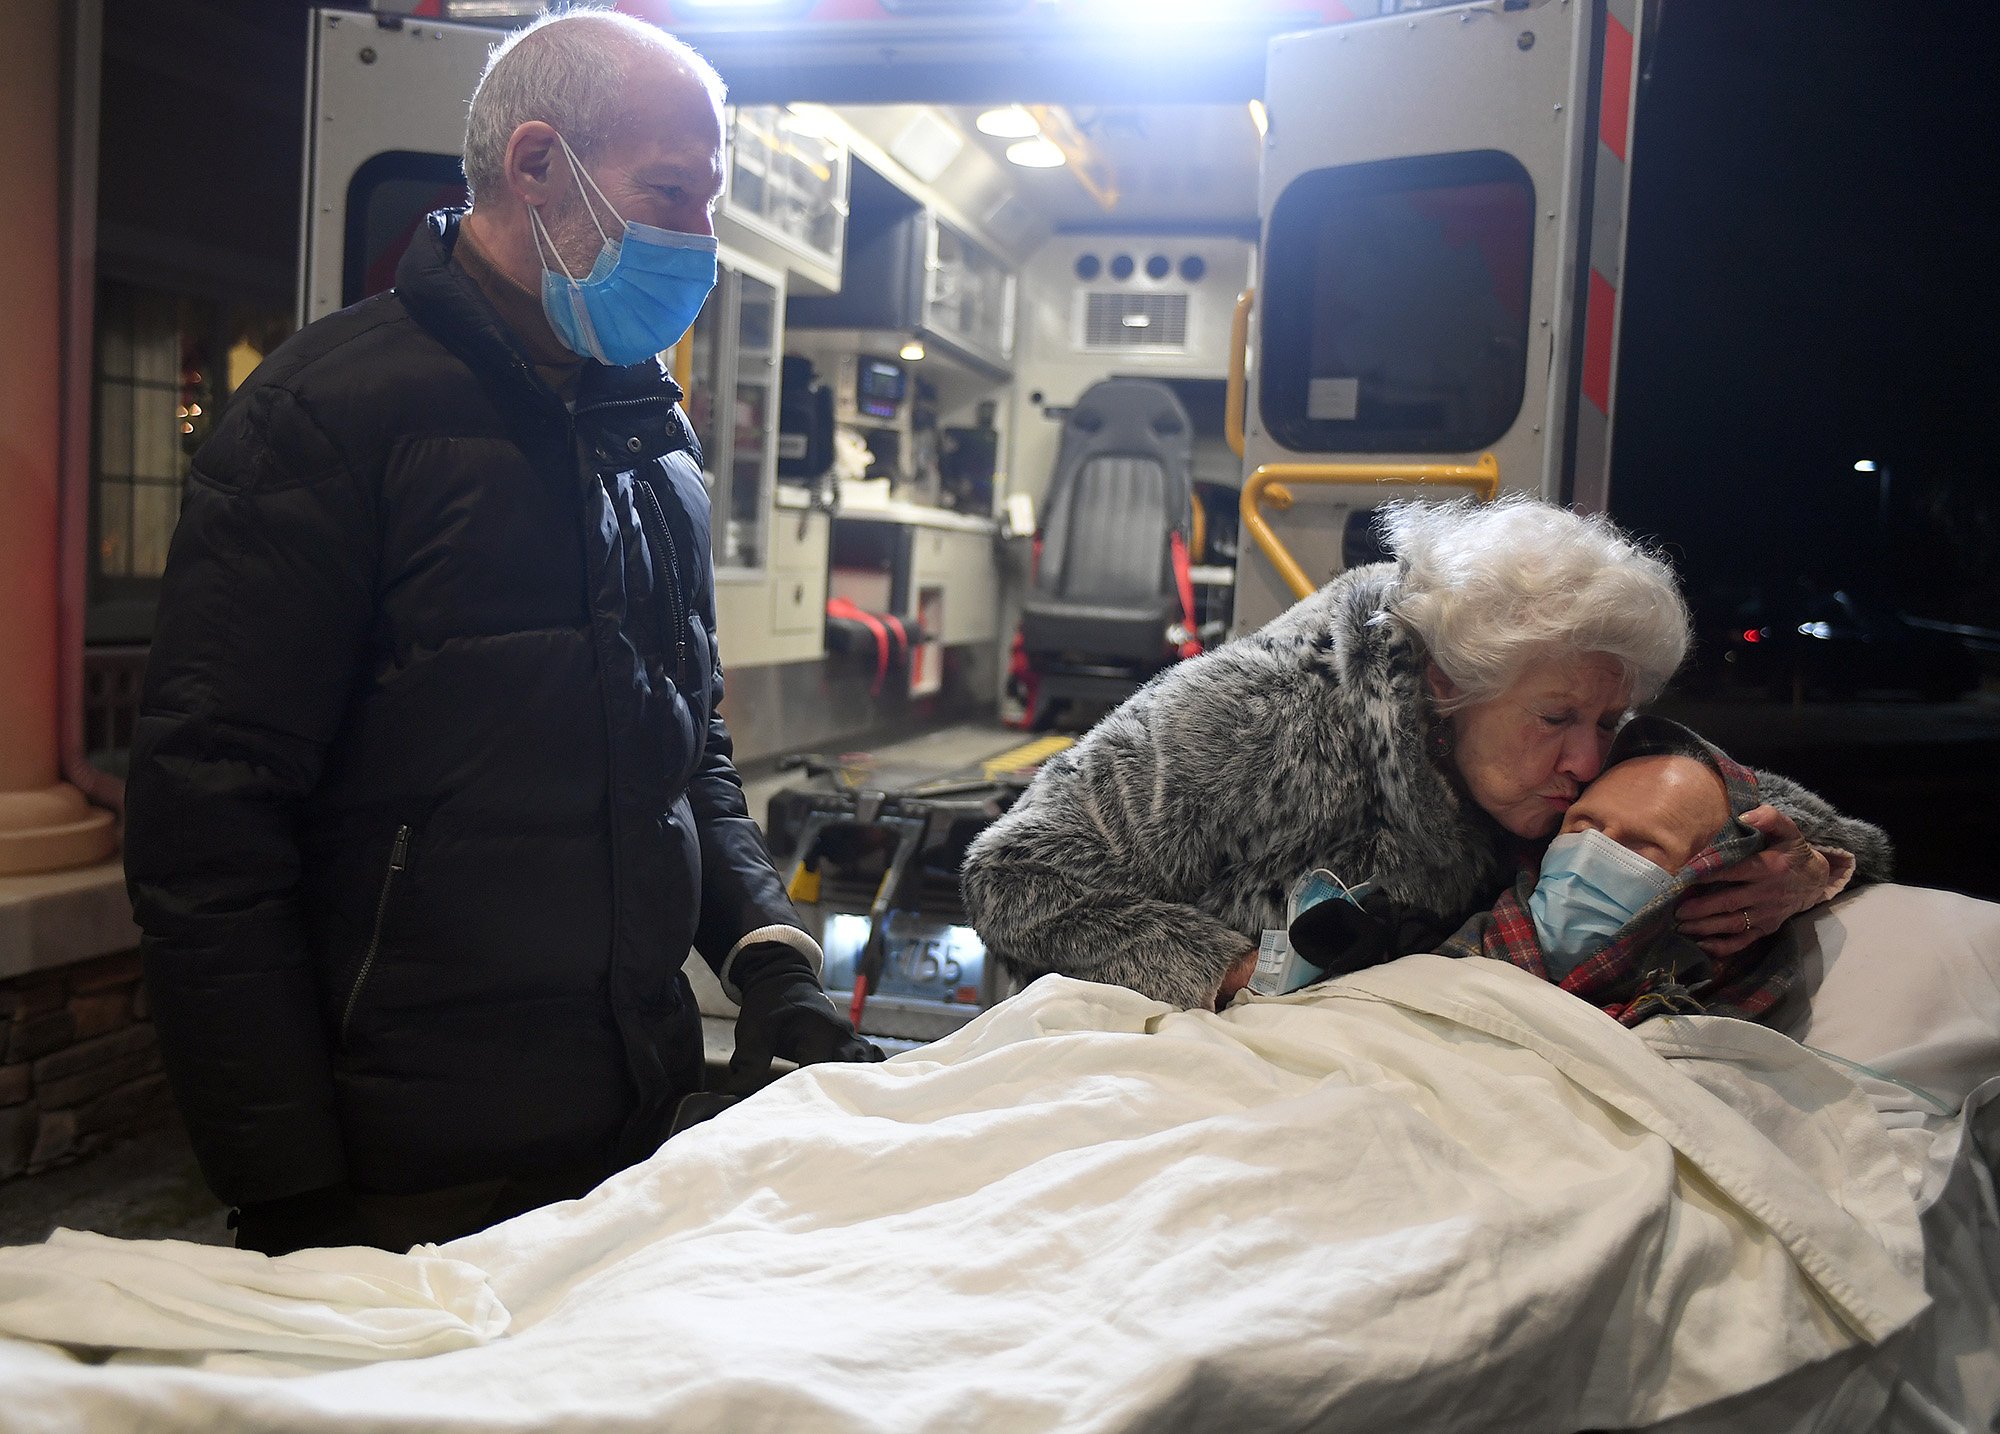  Sherry Wolfe says goodbye to her husband Harold Wolfe, 95, as their son Scott looks on after Harold was transported from Westerly Hospital to hospice at Mystic Healthcare Monday, January 10, 2022. The couple have been married for over 70 years and a